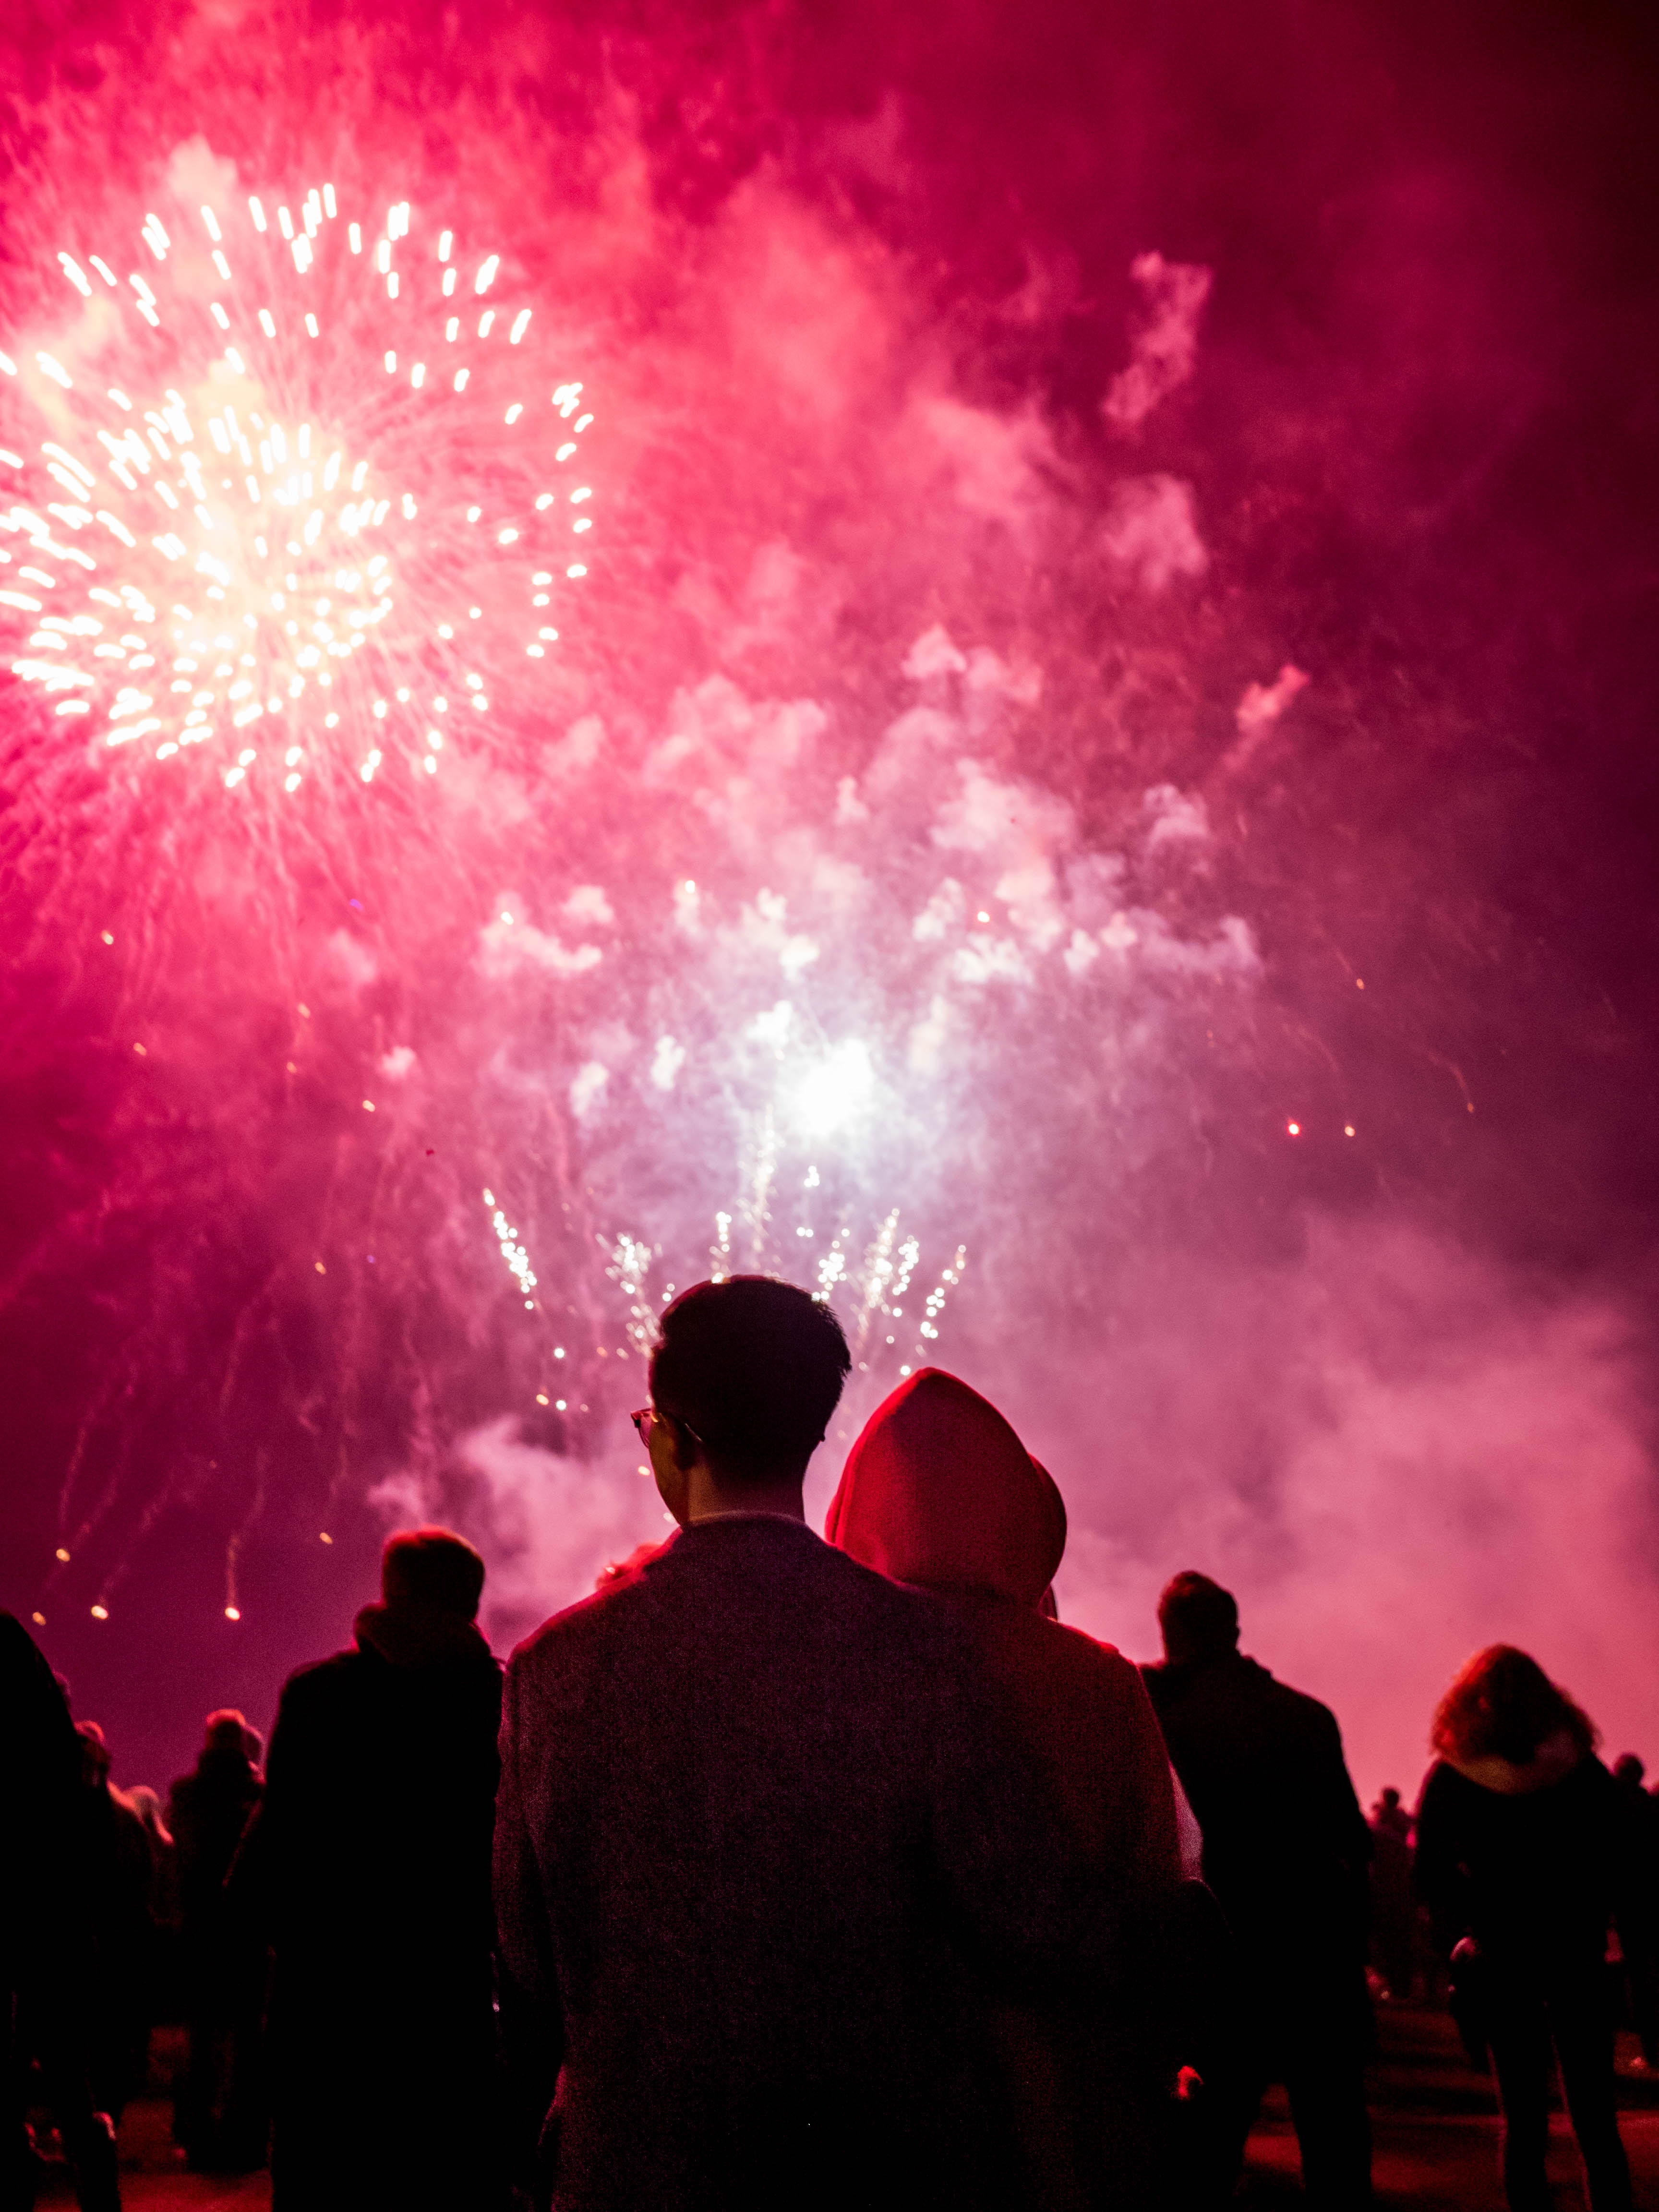 A couple looking at fireworks. | Source: Unsplash